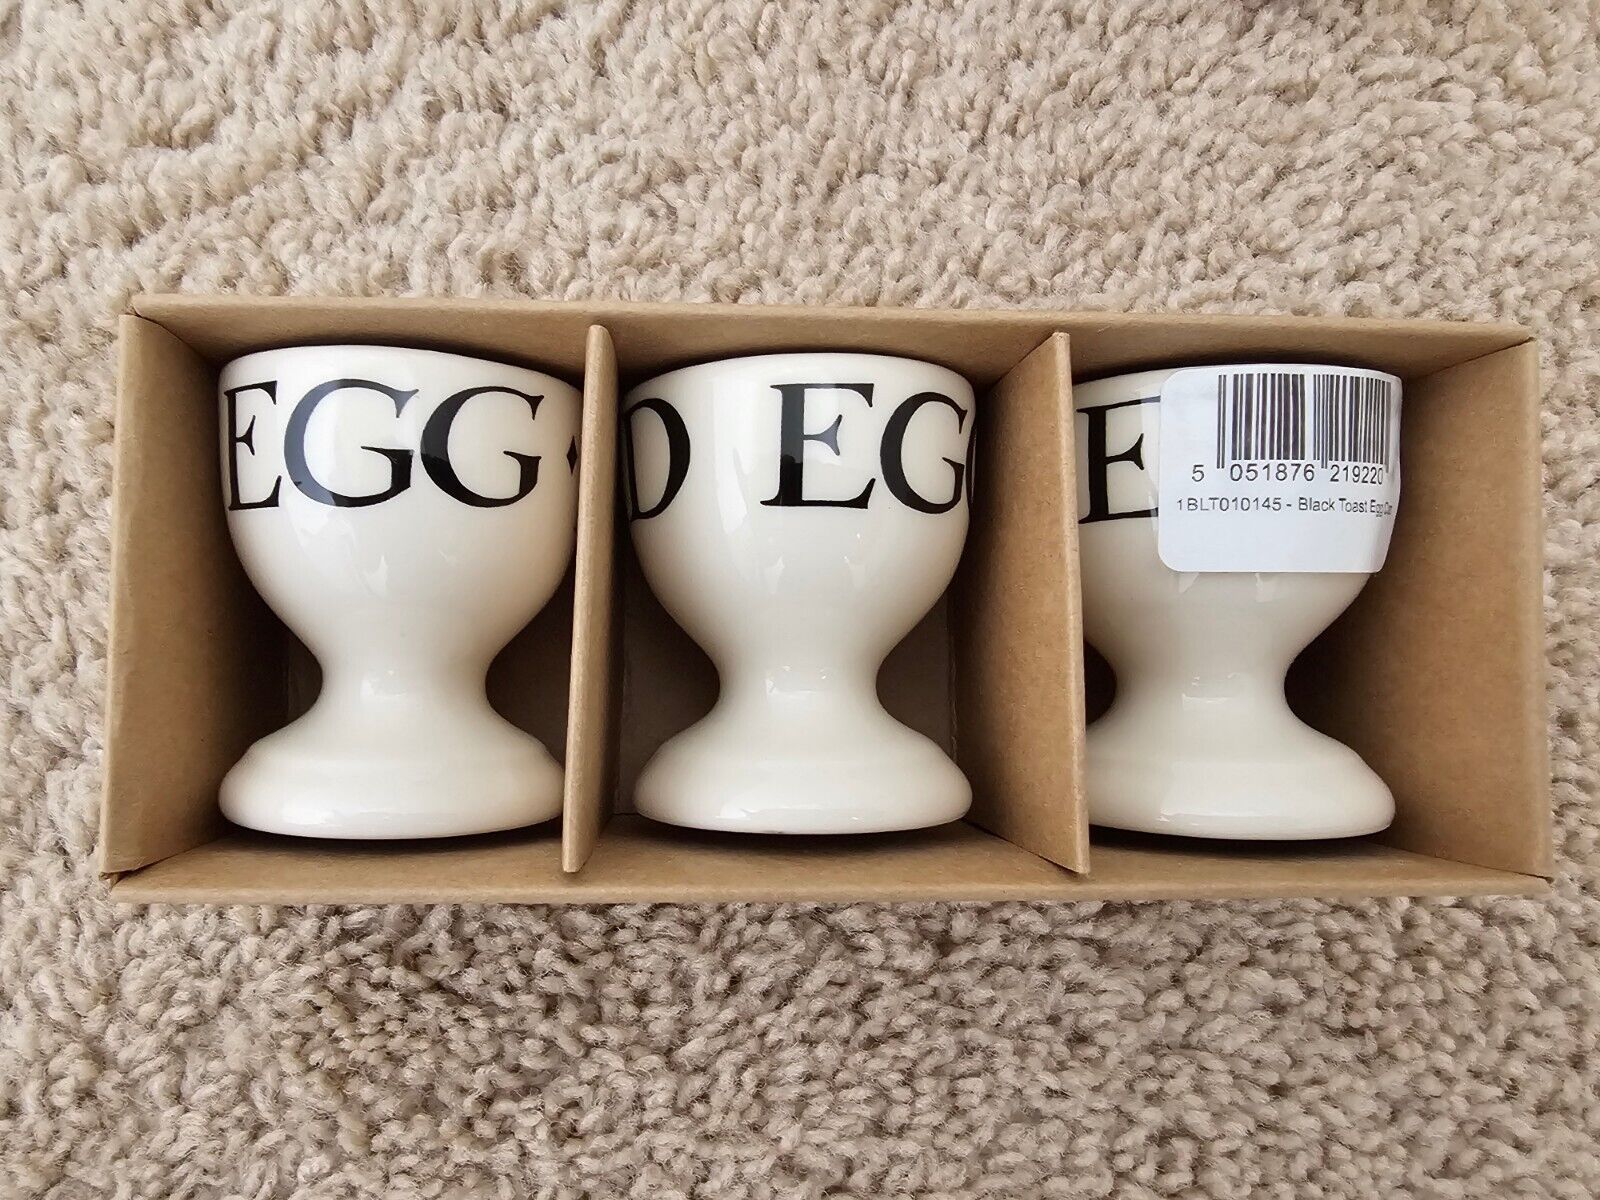 Brand New Emma Bridgewater Black Toast Set of 3 Egg Cups in box First Pottery